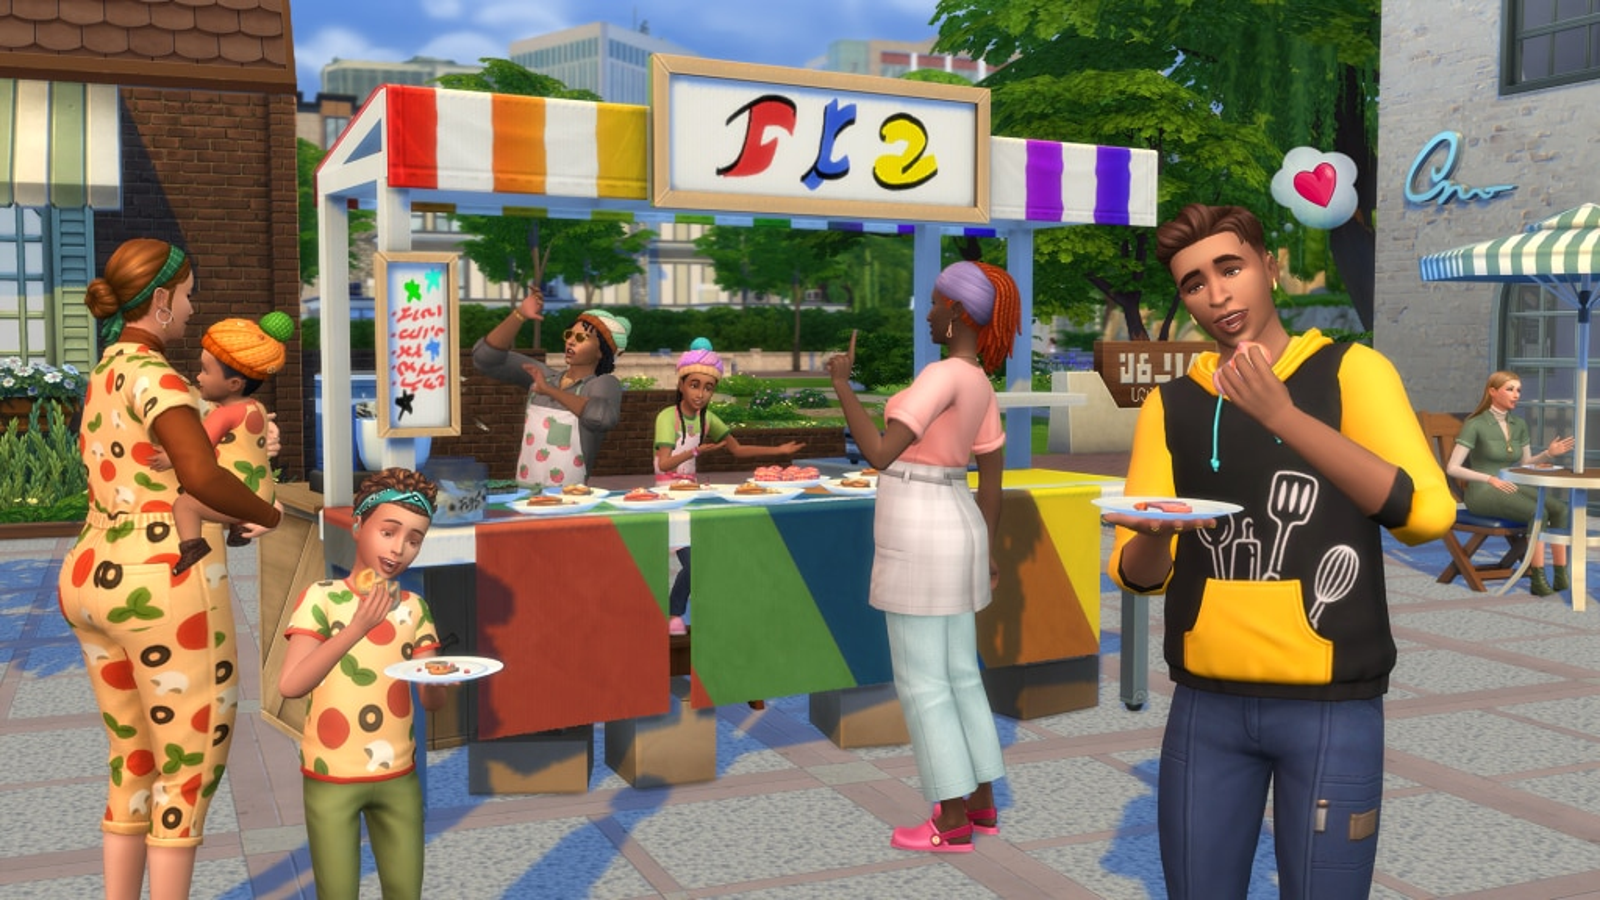 The Sims 4 Home Chef Hustle Trailer Reveals Details on New Stuff